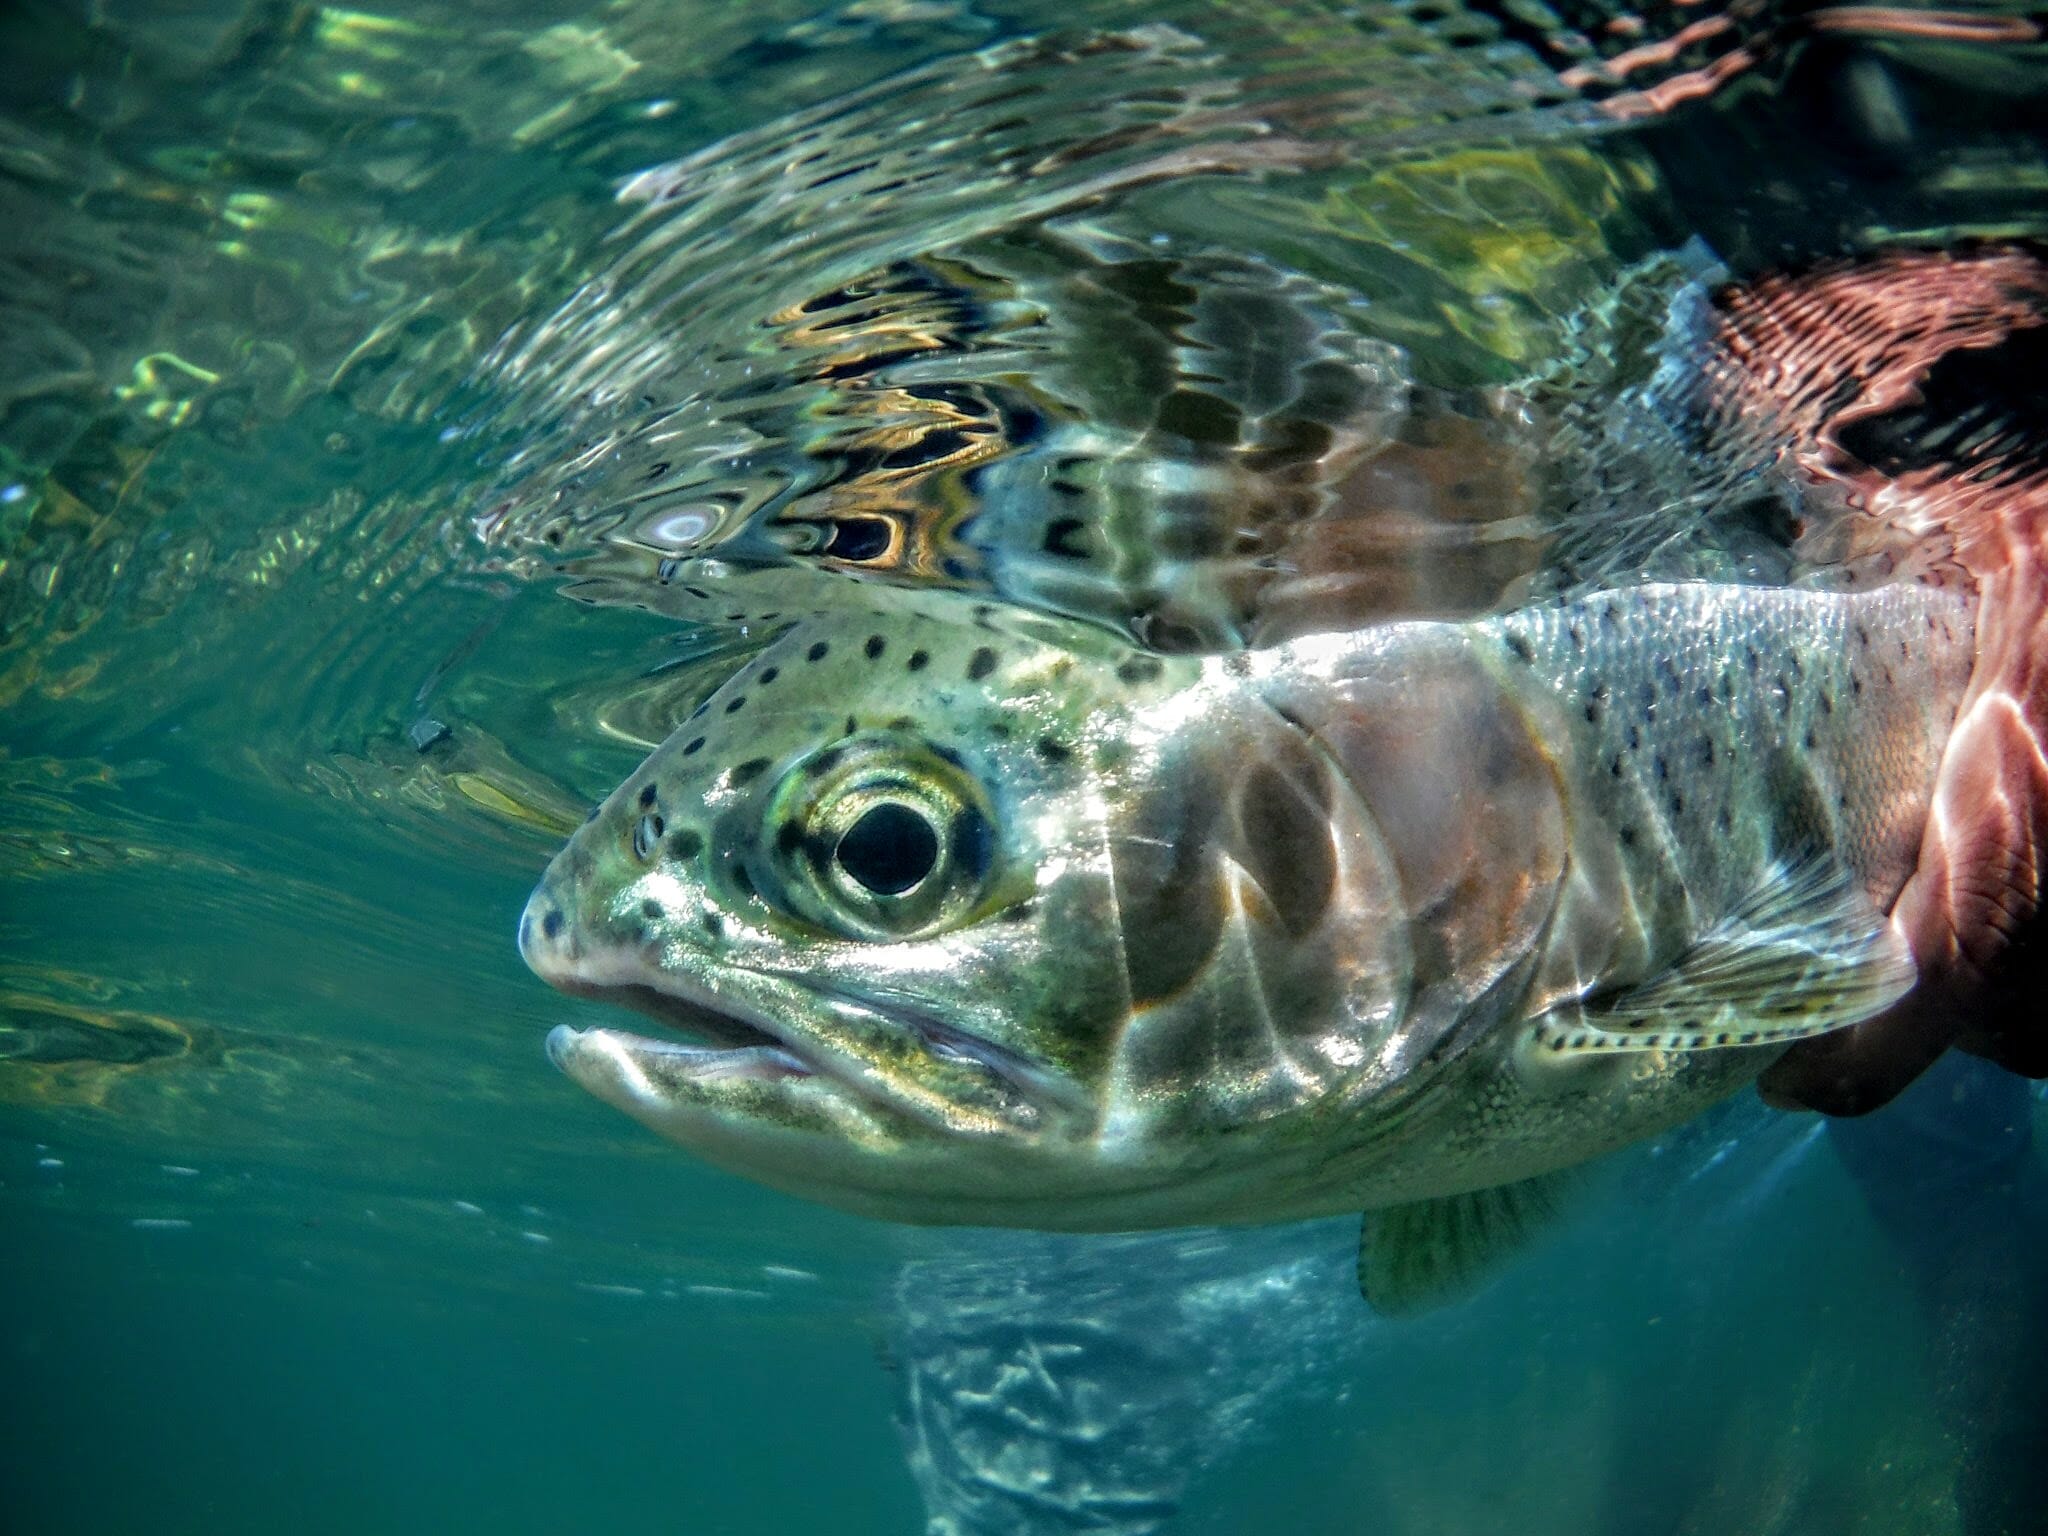 A rainbow trout under water.